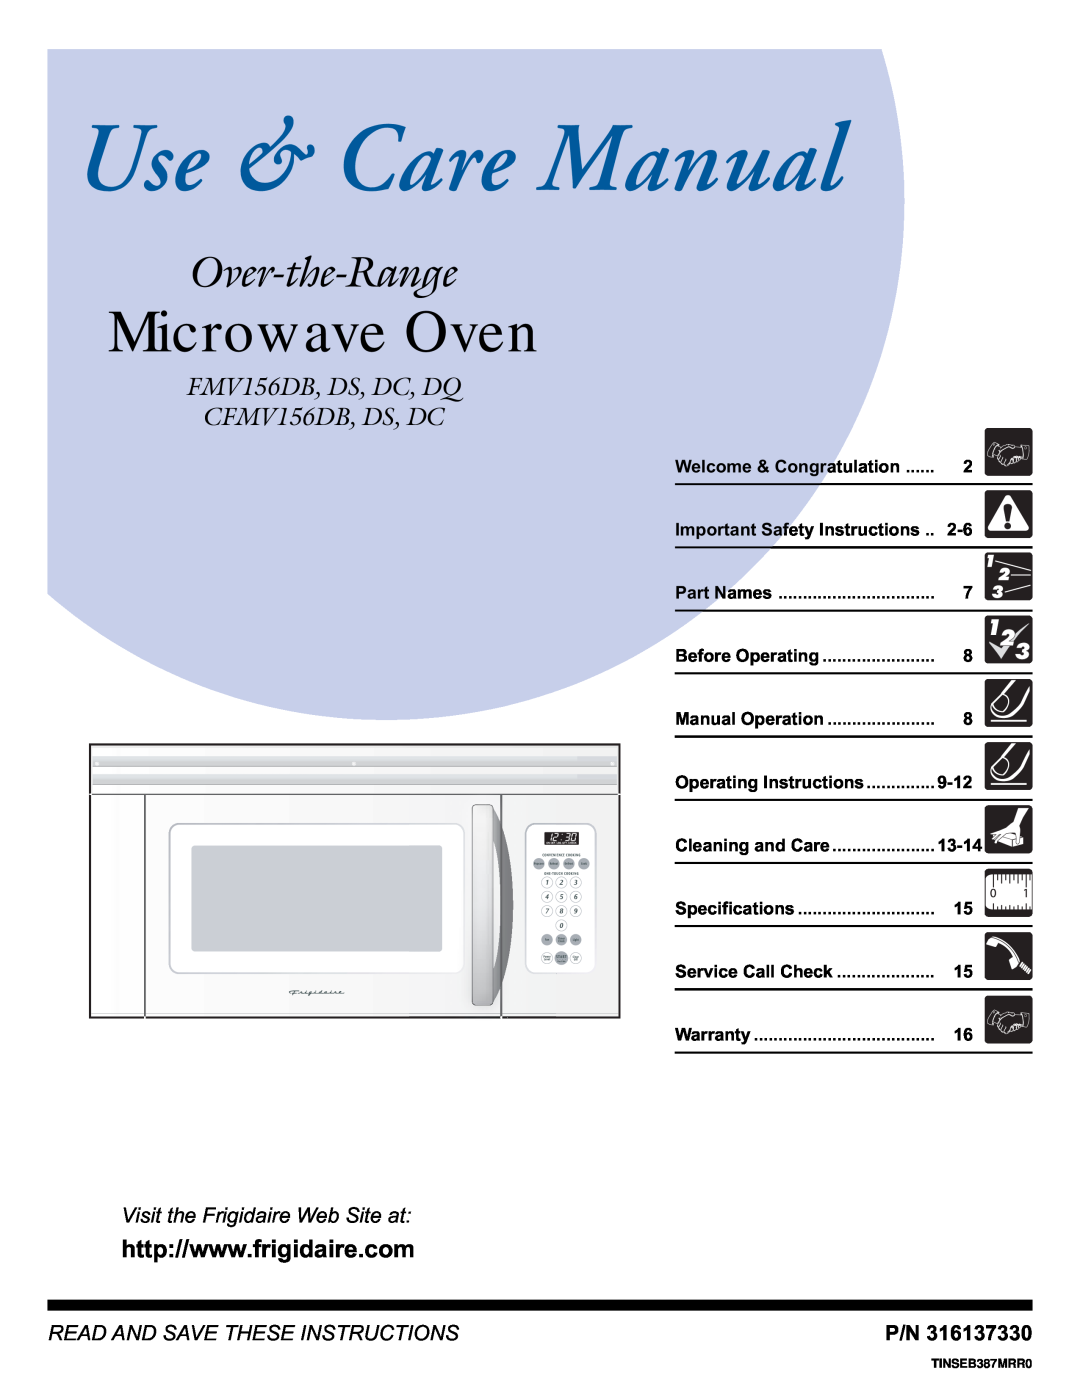 Frigidaire important safety instructions Microwave Oven, Over-the-Range, FMV156DB, DS, DC, DQ CFMV156DB, DS, DC, 9-12 